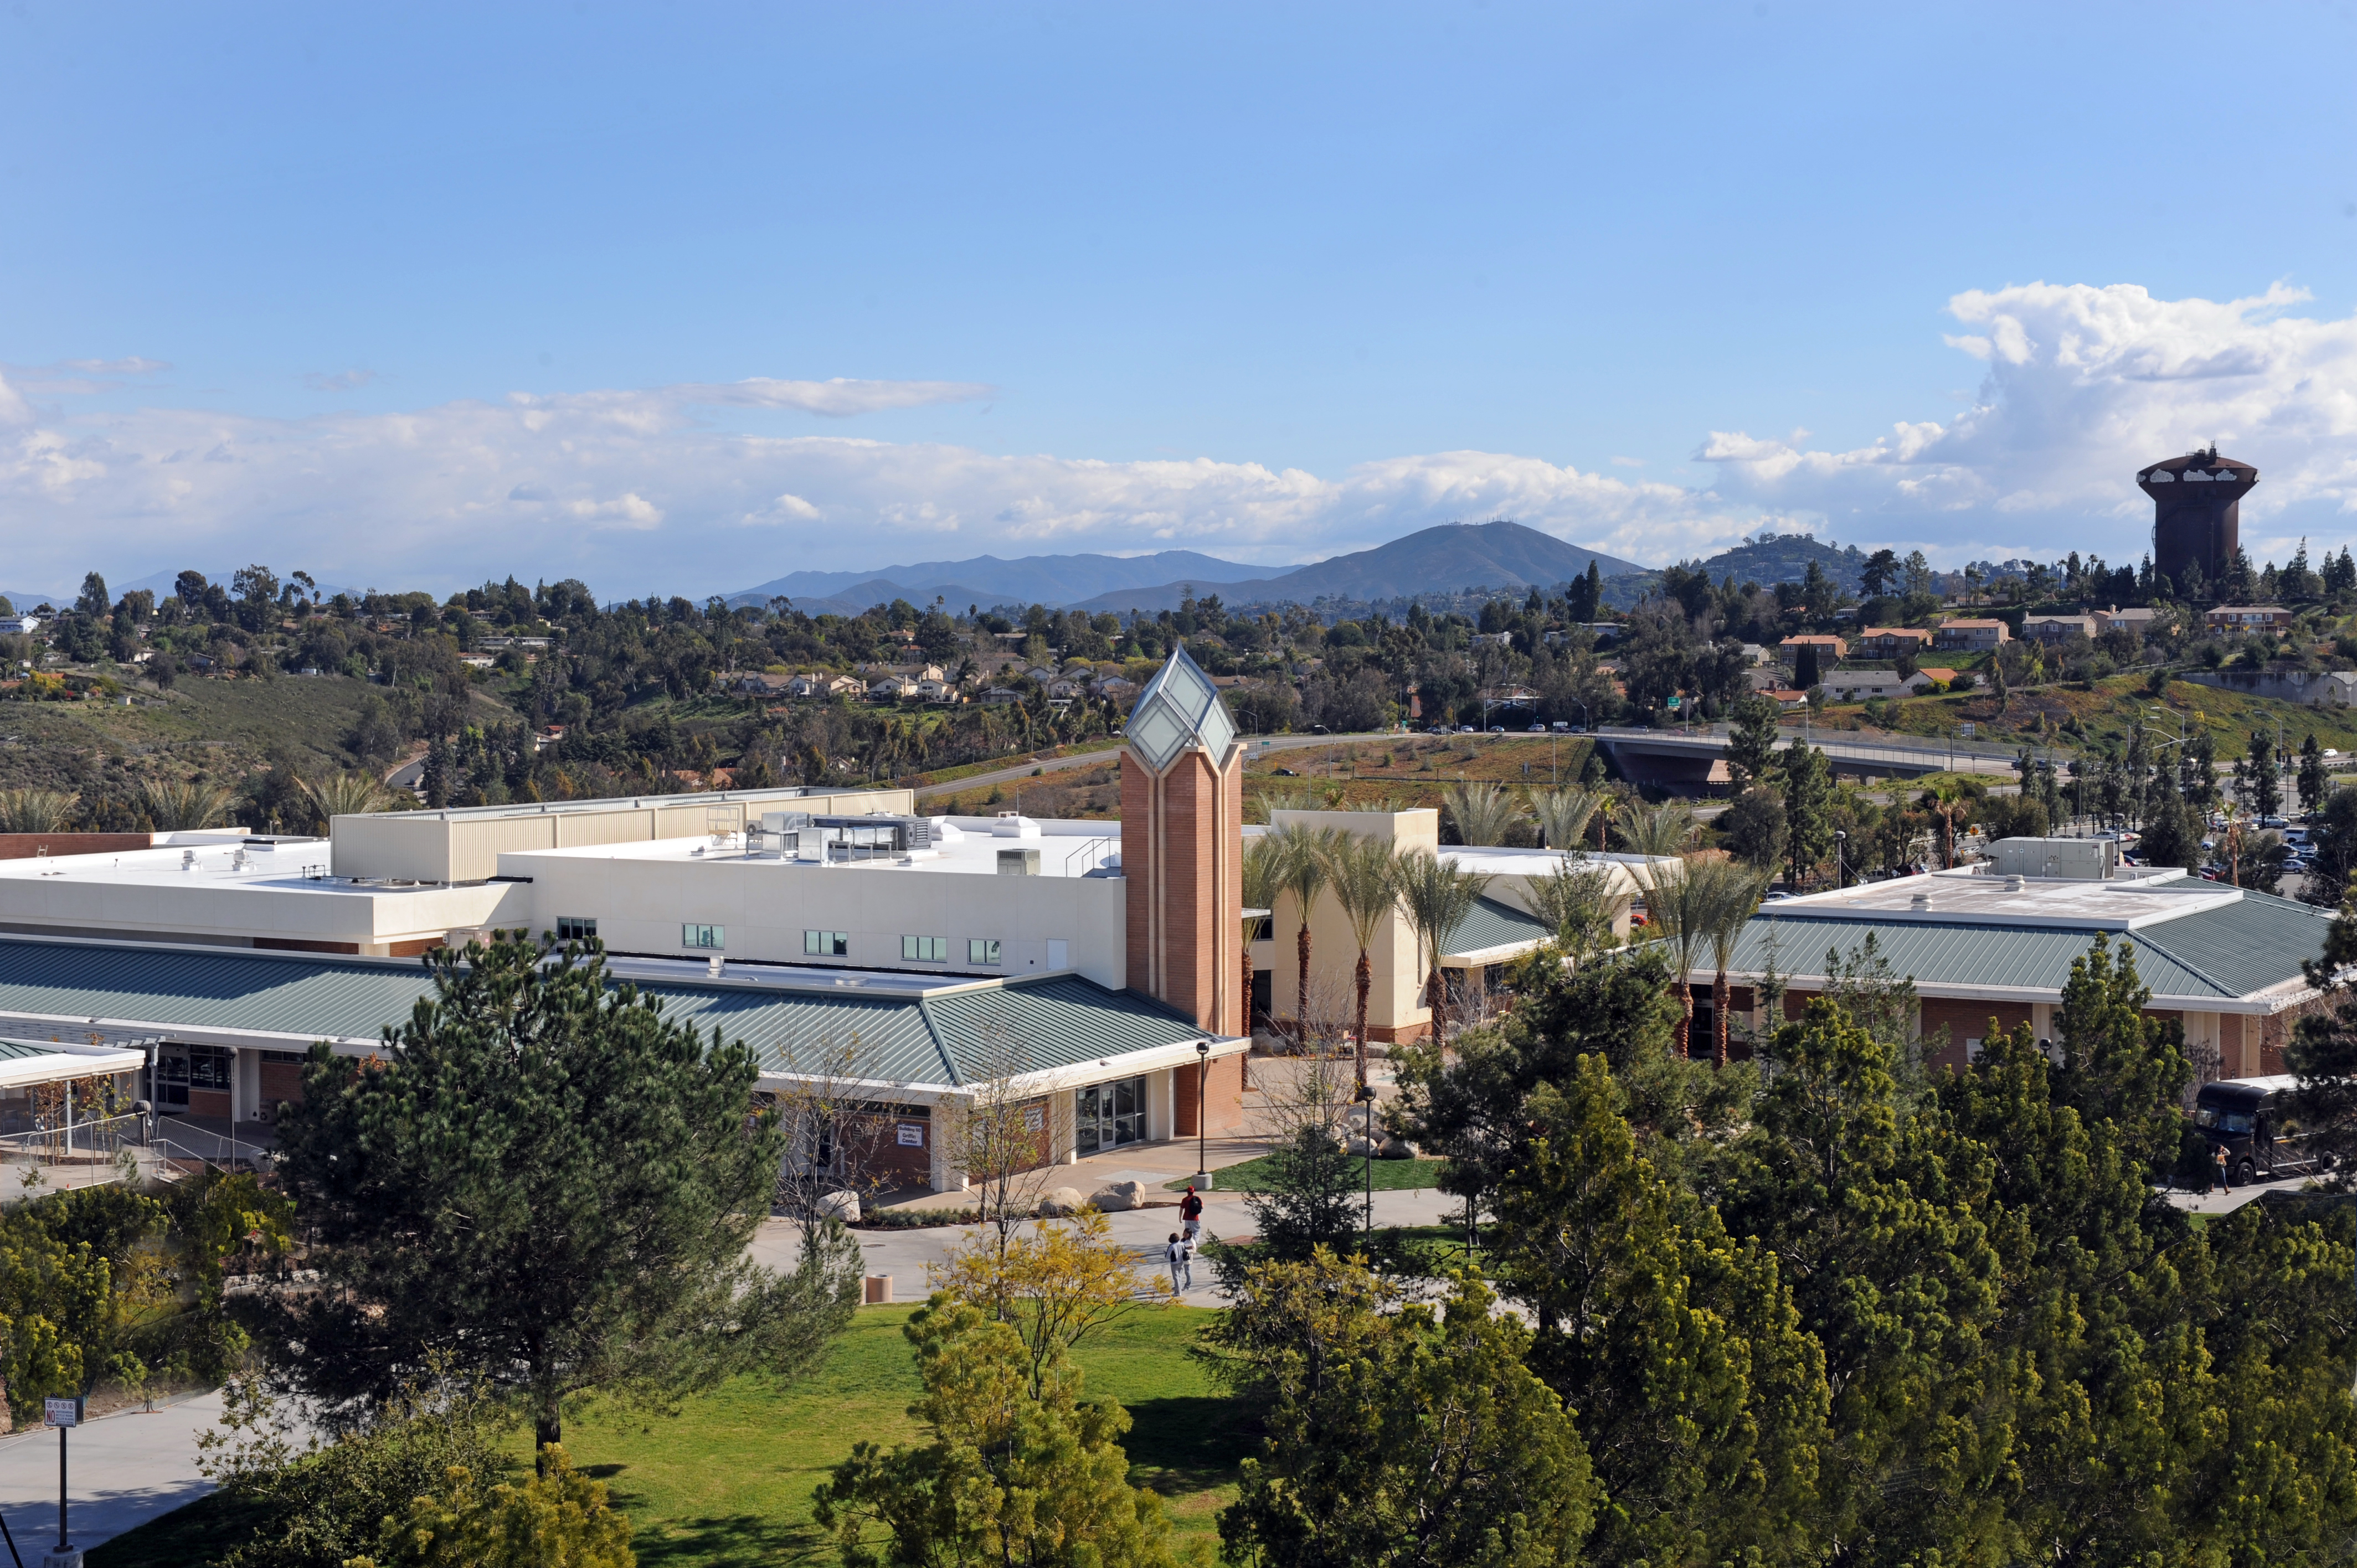 Overlooking the student center at Grossmont College